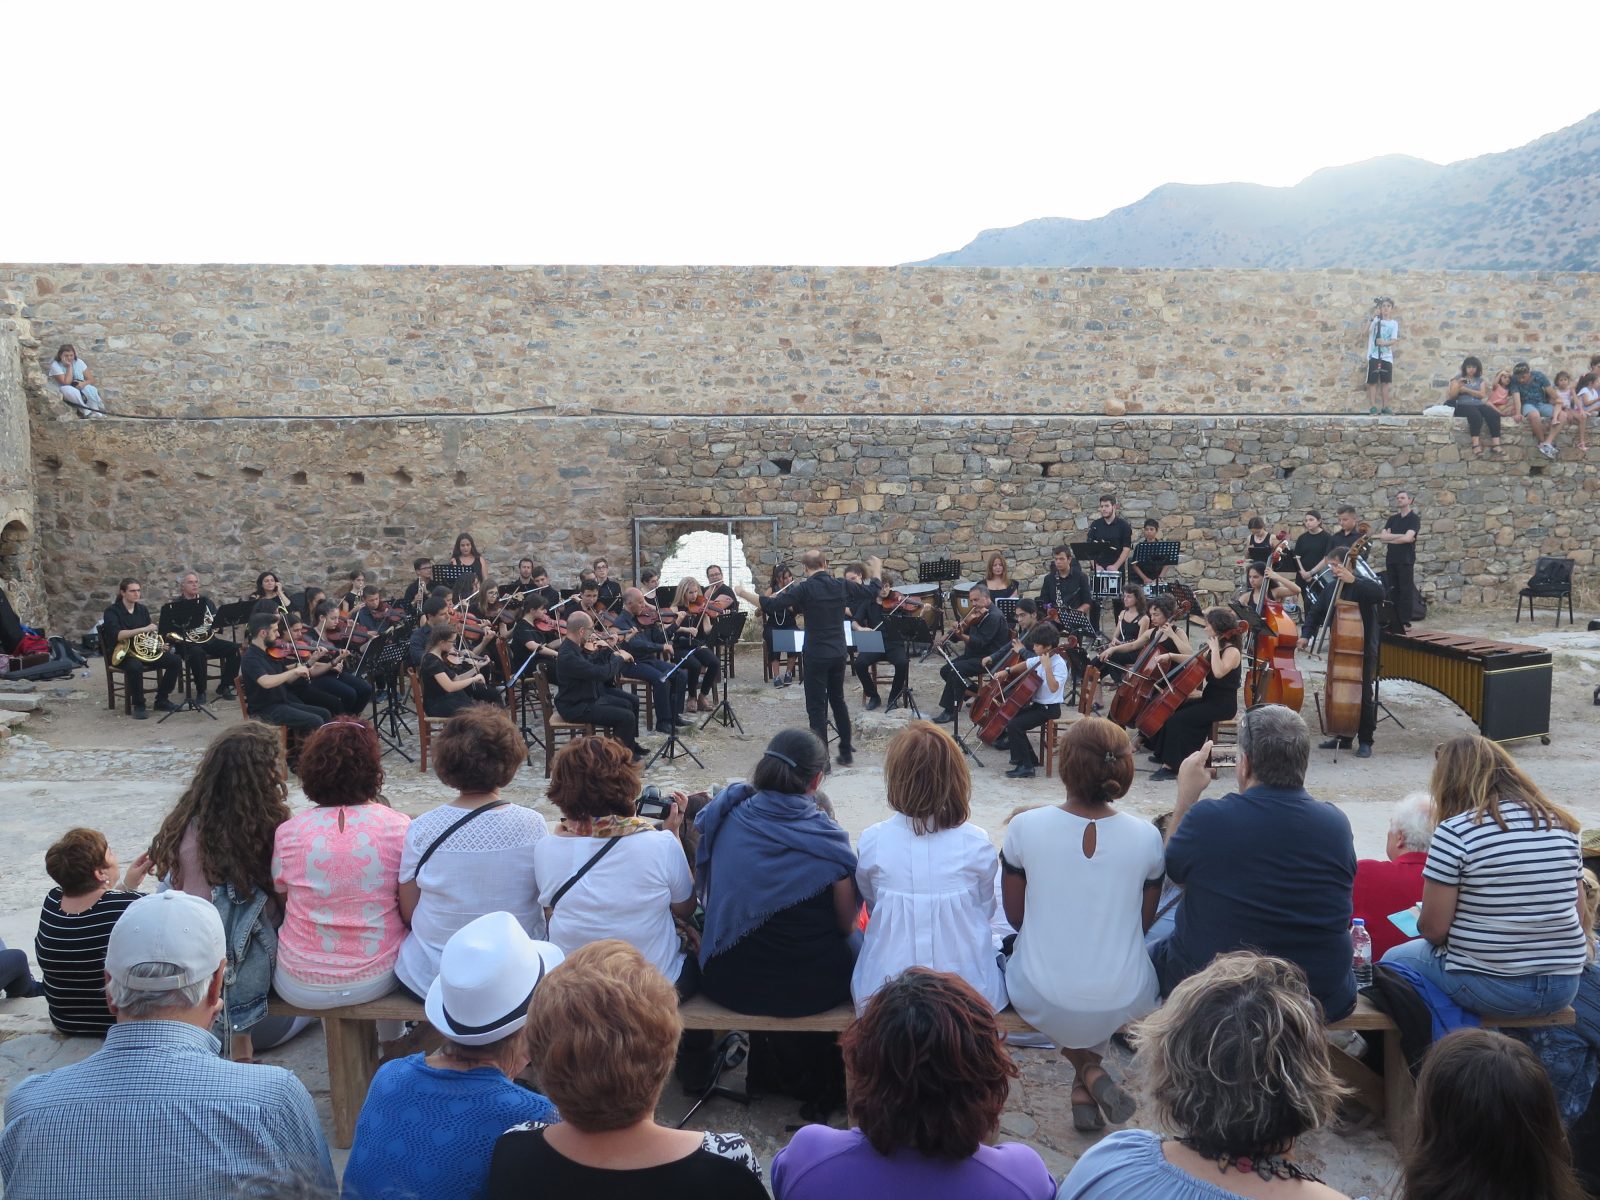 How I Ended Up at a Concert on Spinalonga, the Abandoned Leper Colony IMG 0497